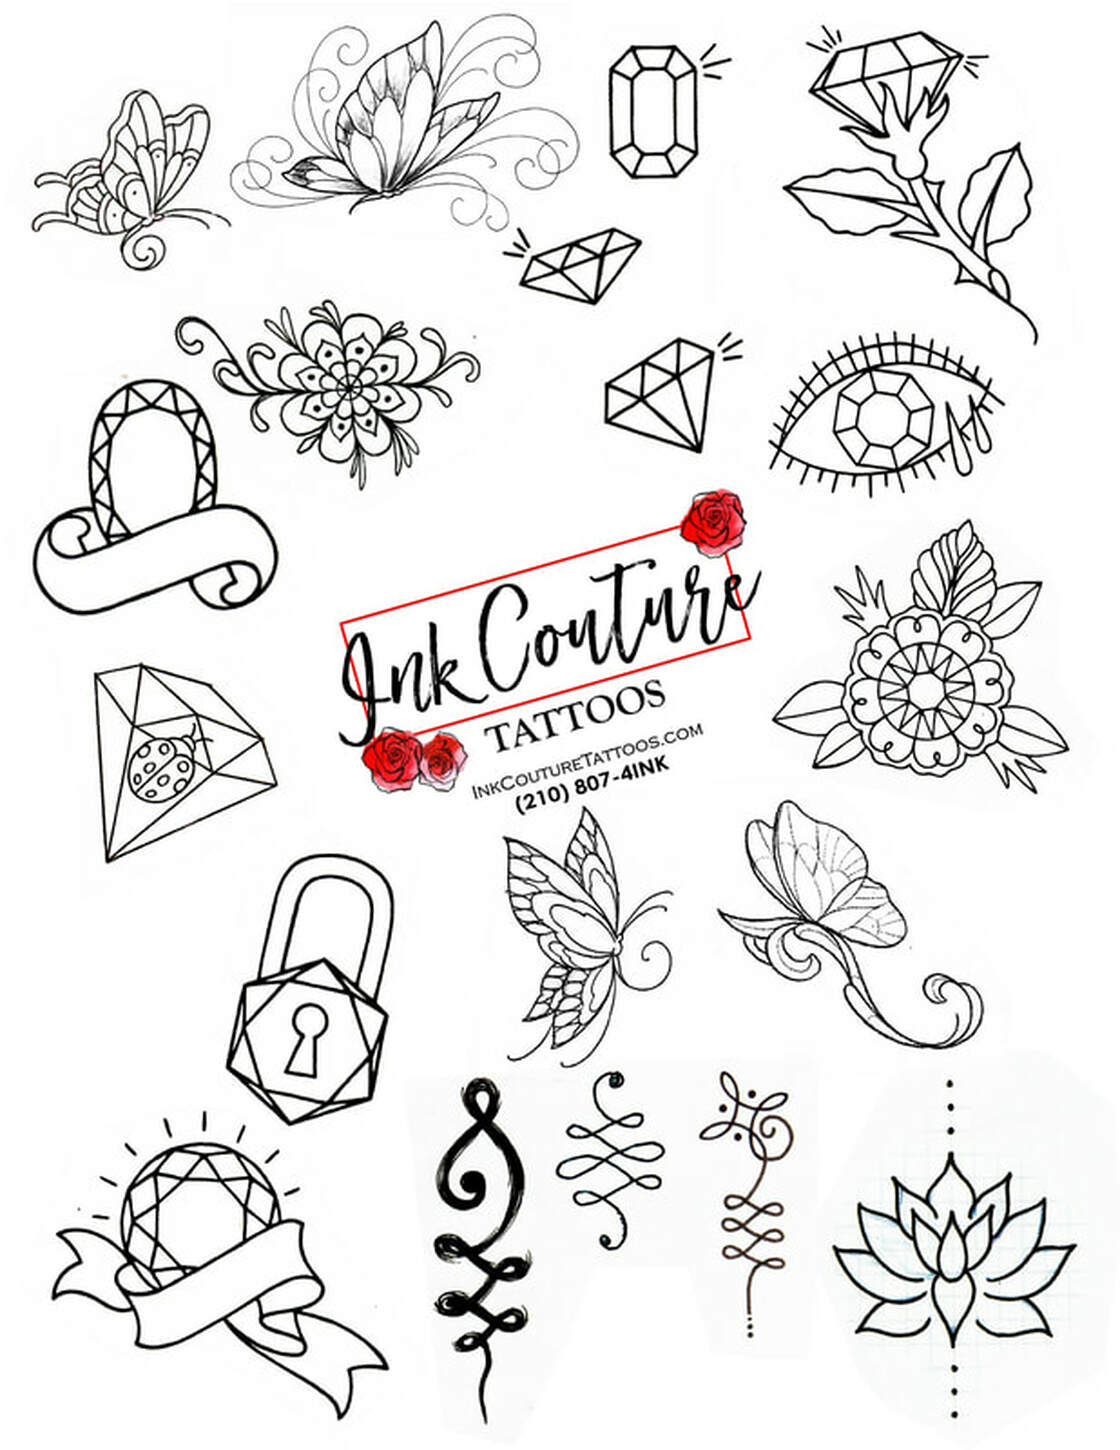 Ladies Night - Thursdays at Ink Couture Tattoos